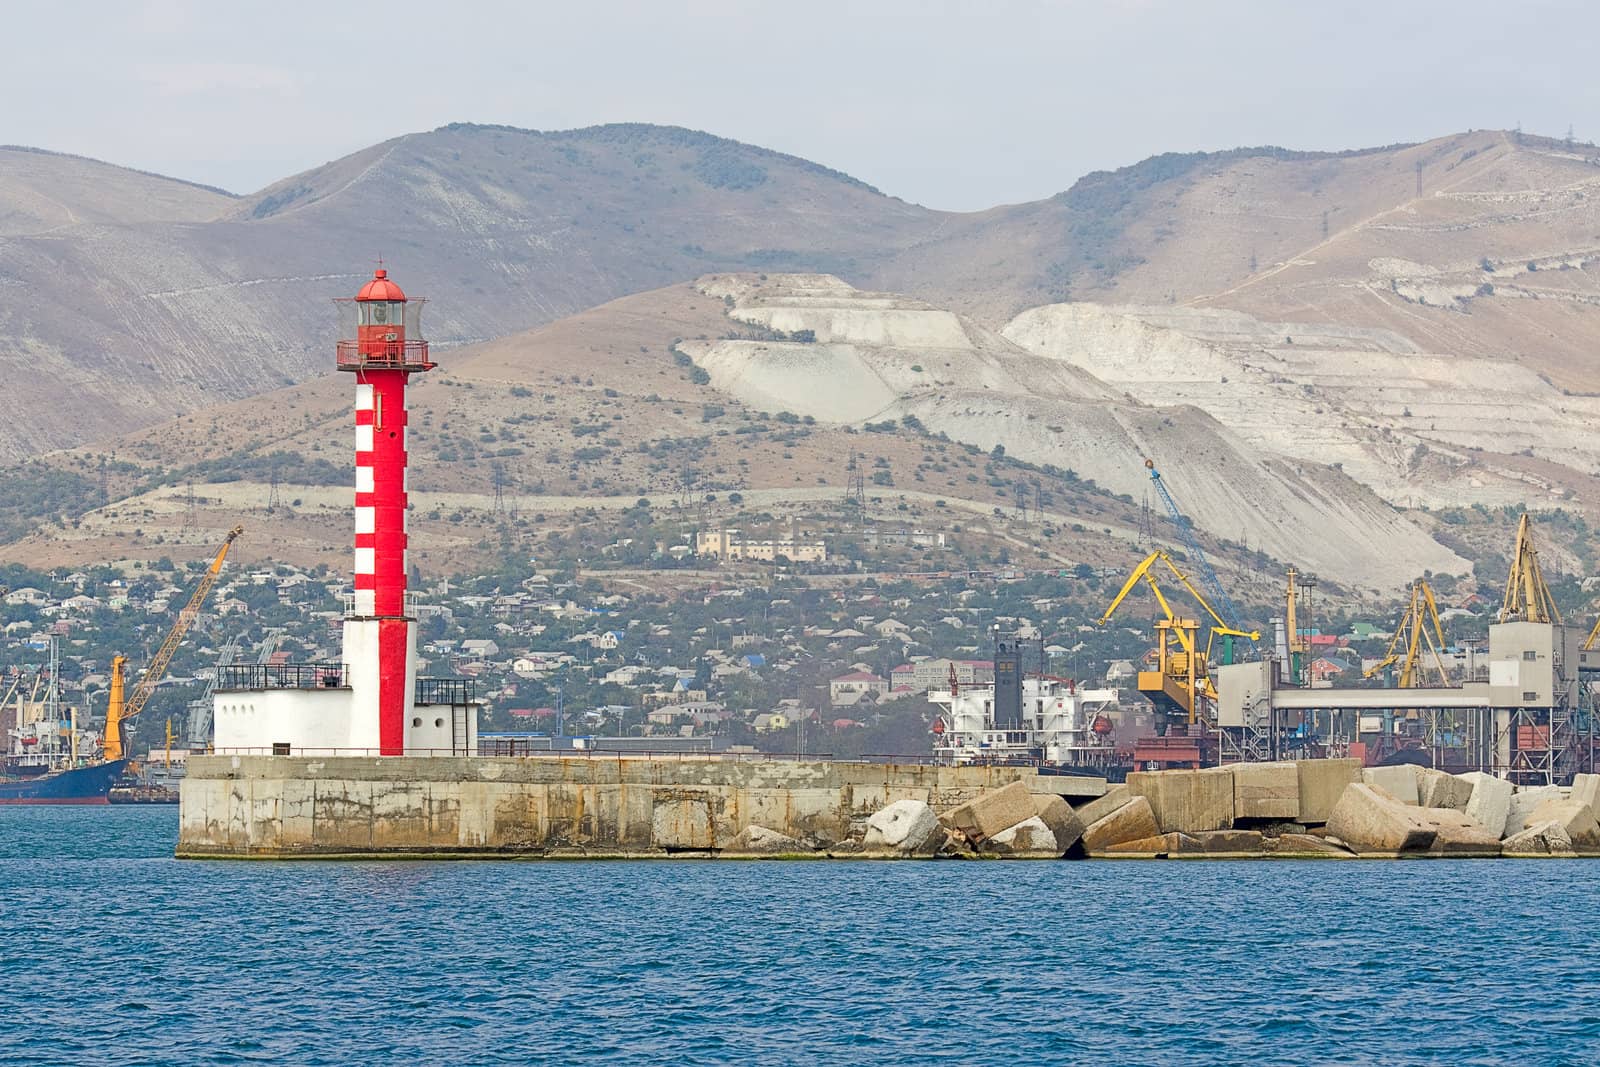 At  entrance to  port of Lighthouse on  shores of  Black Sea, Novorossiysk, Russia.
